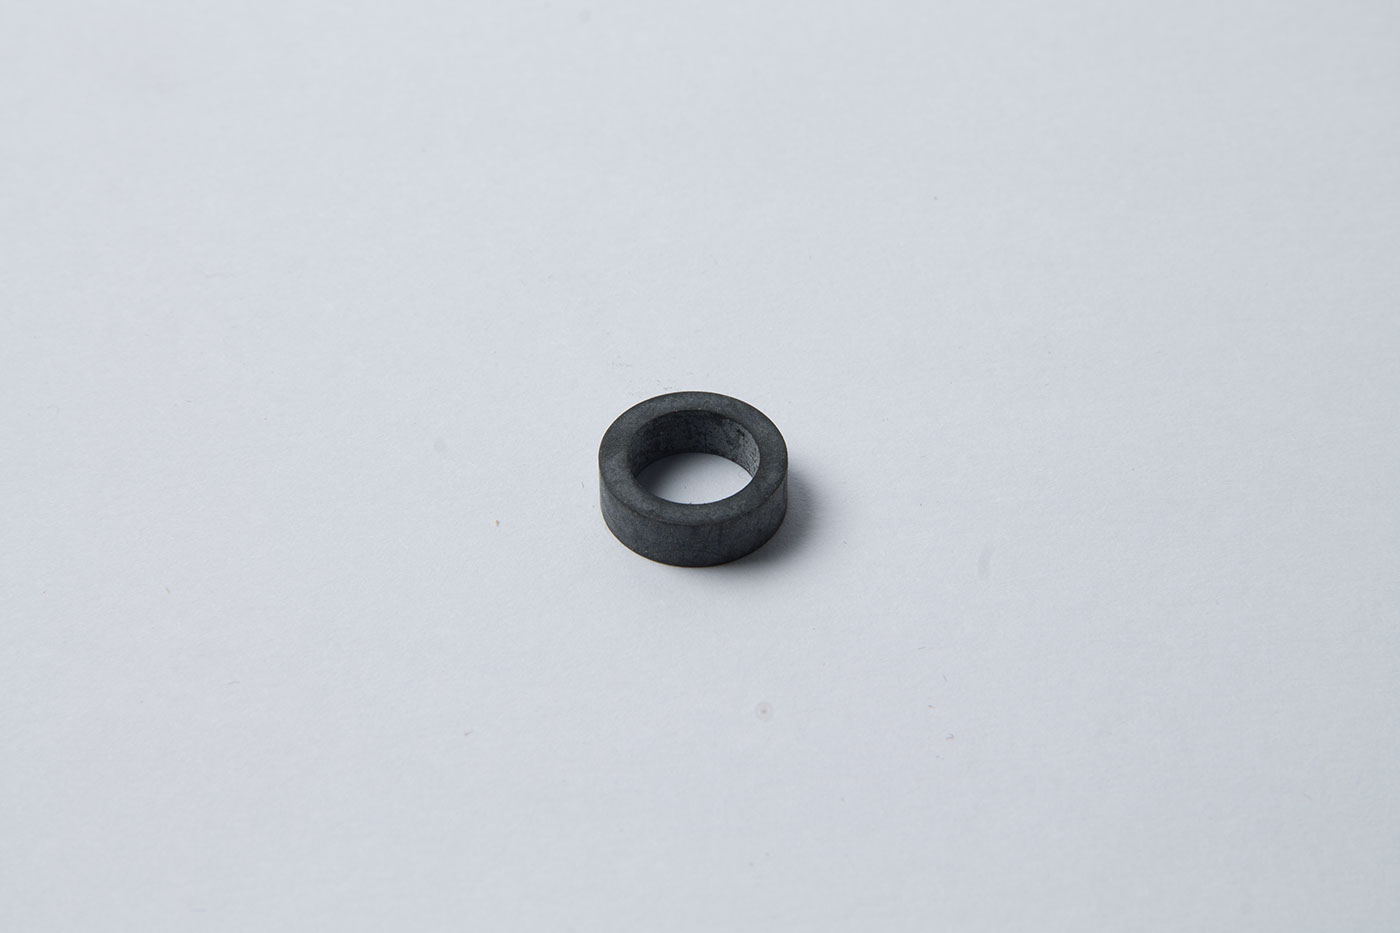 Gummidichtring
Rubber sealing ring
Joint en caoutchouc
Anillo